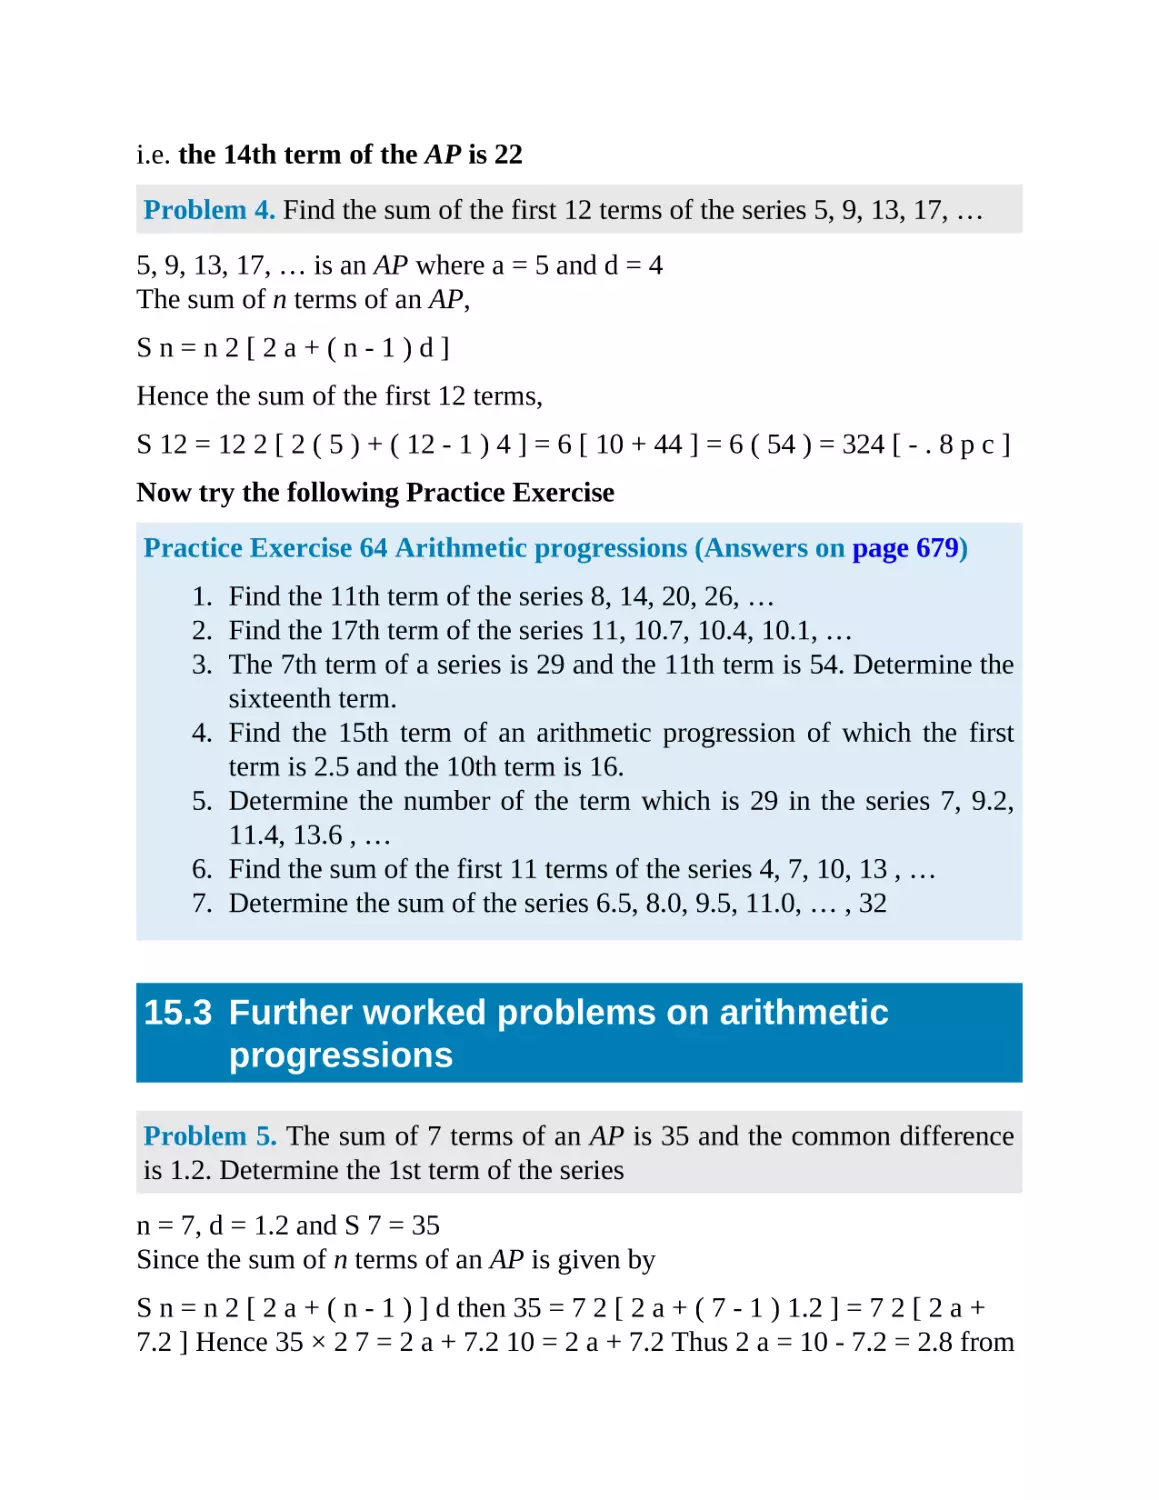 15.3 Further worked problems on arithmetic progressions